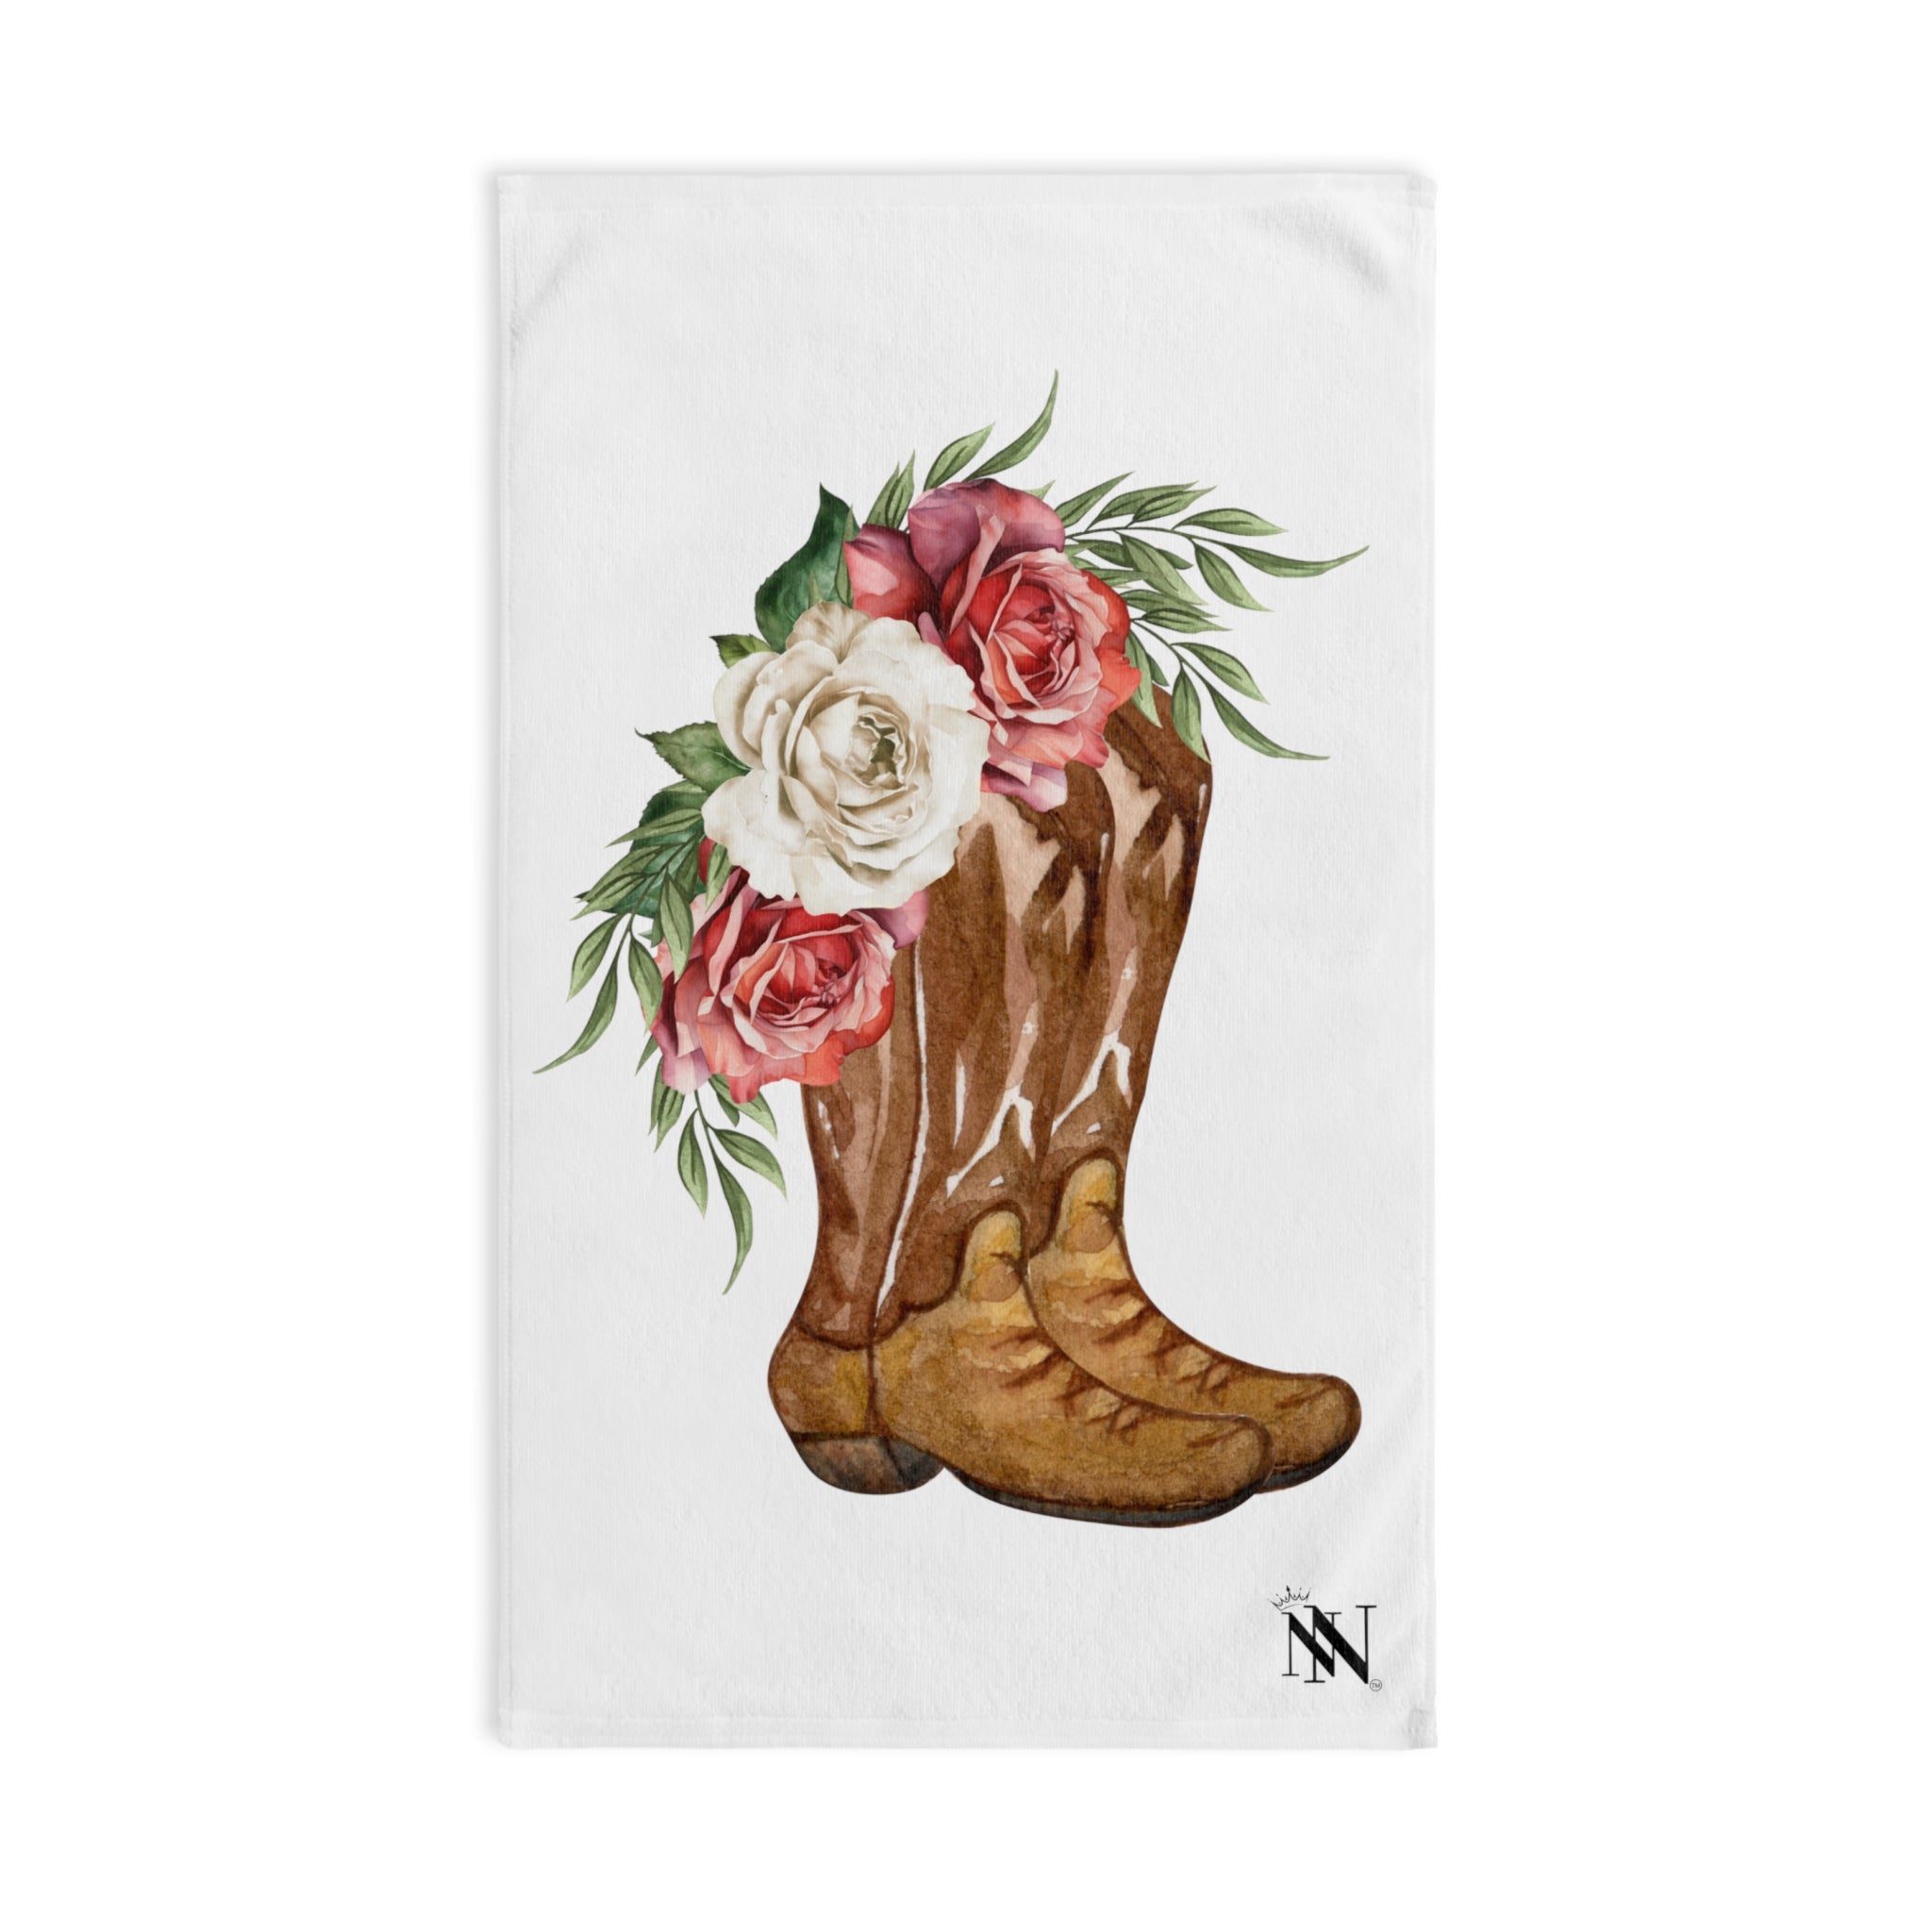 Boot Rose Vow White | Funny Gifts for Men - Gifts for Him - Birthday Gifts for Men, Him, Her, Husband, Boyfriend, Girlfriend, New Couple Gifts, Fathers & Valentines Day Gifts, Christmas Gifts NECTAR NAPKINS